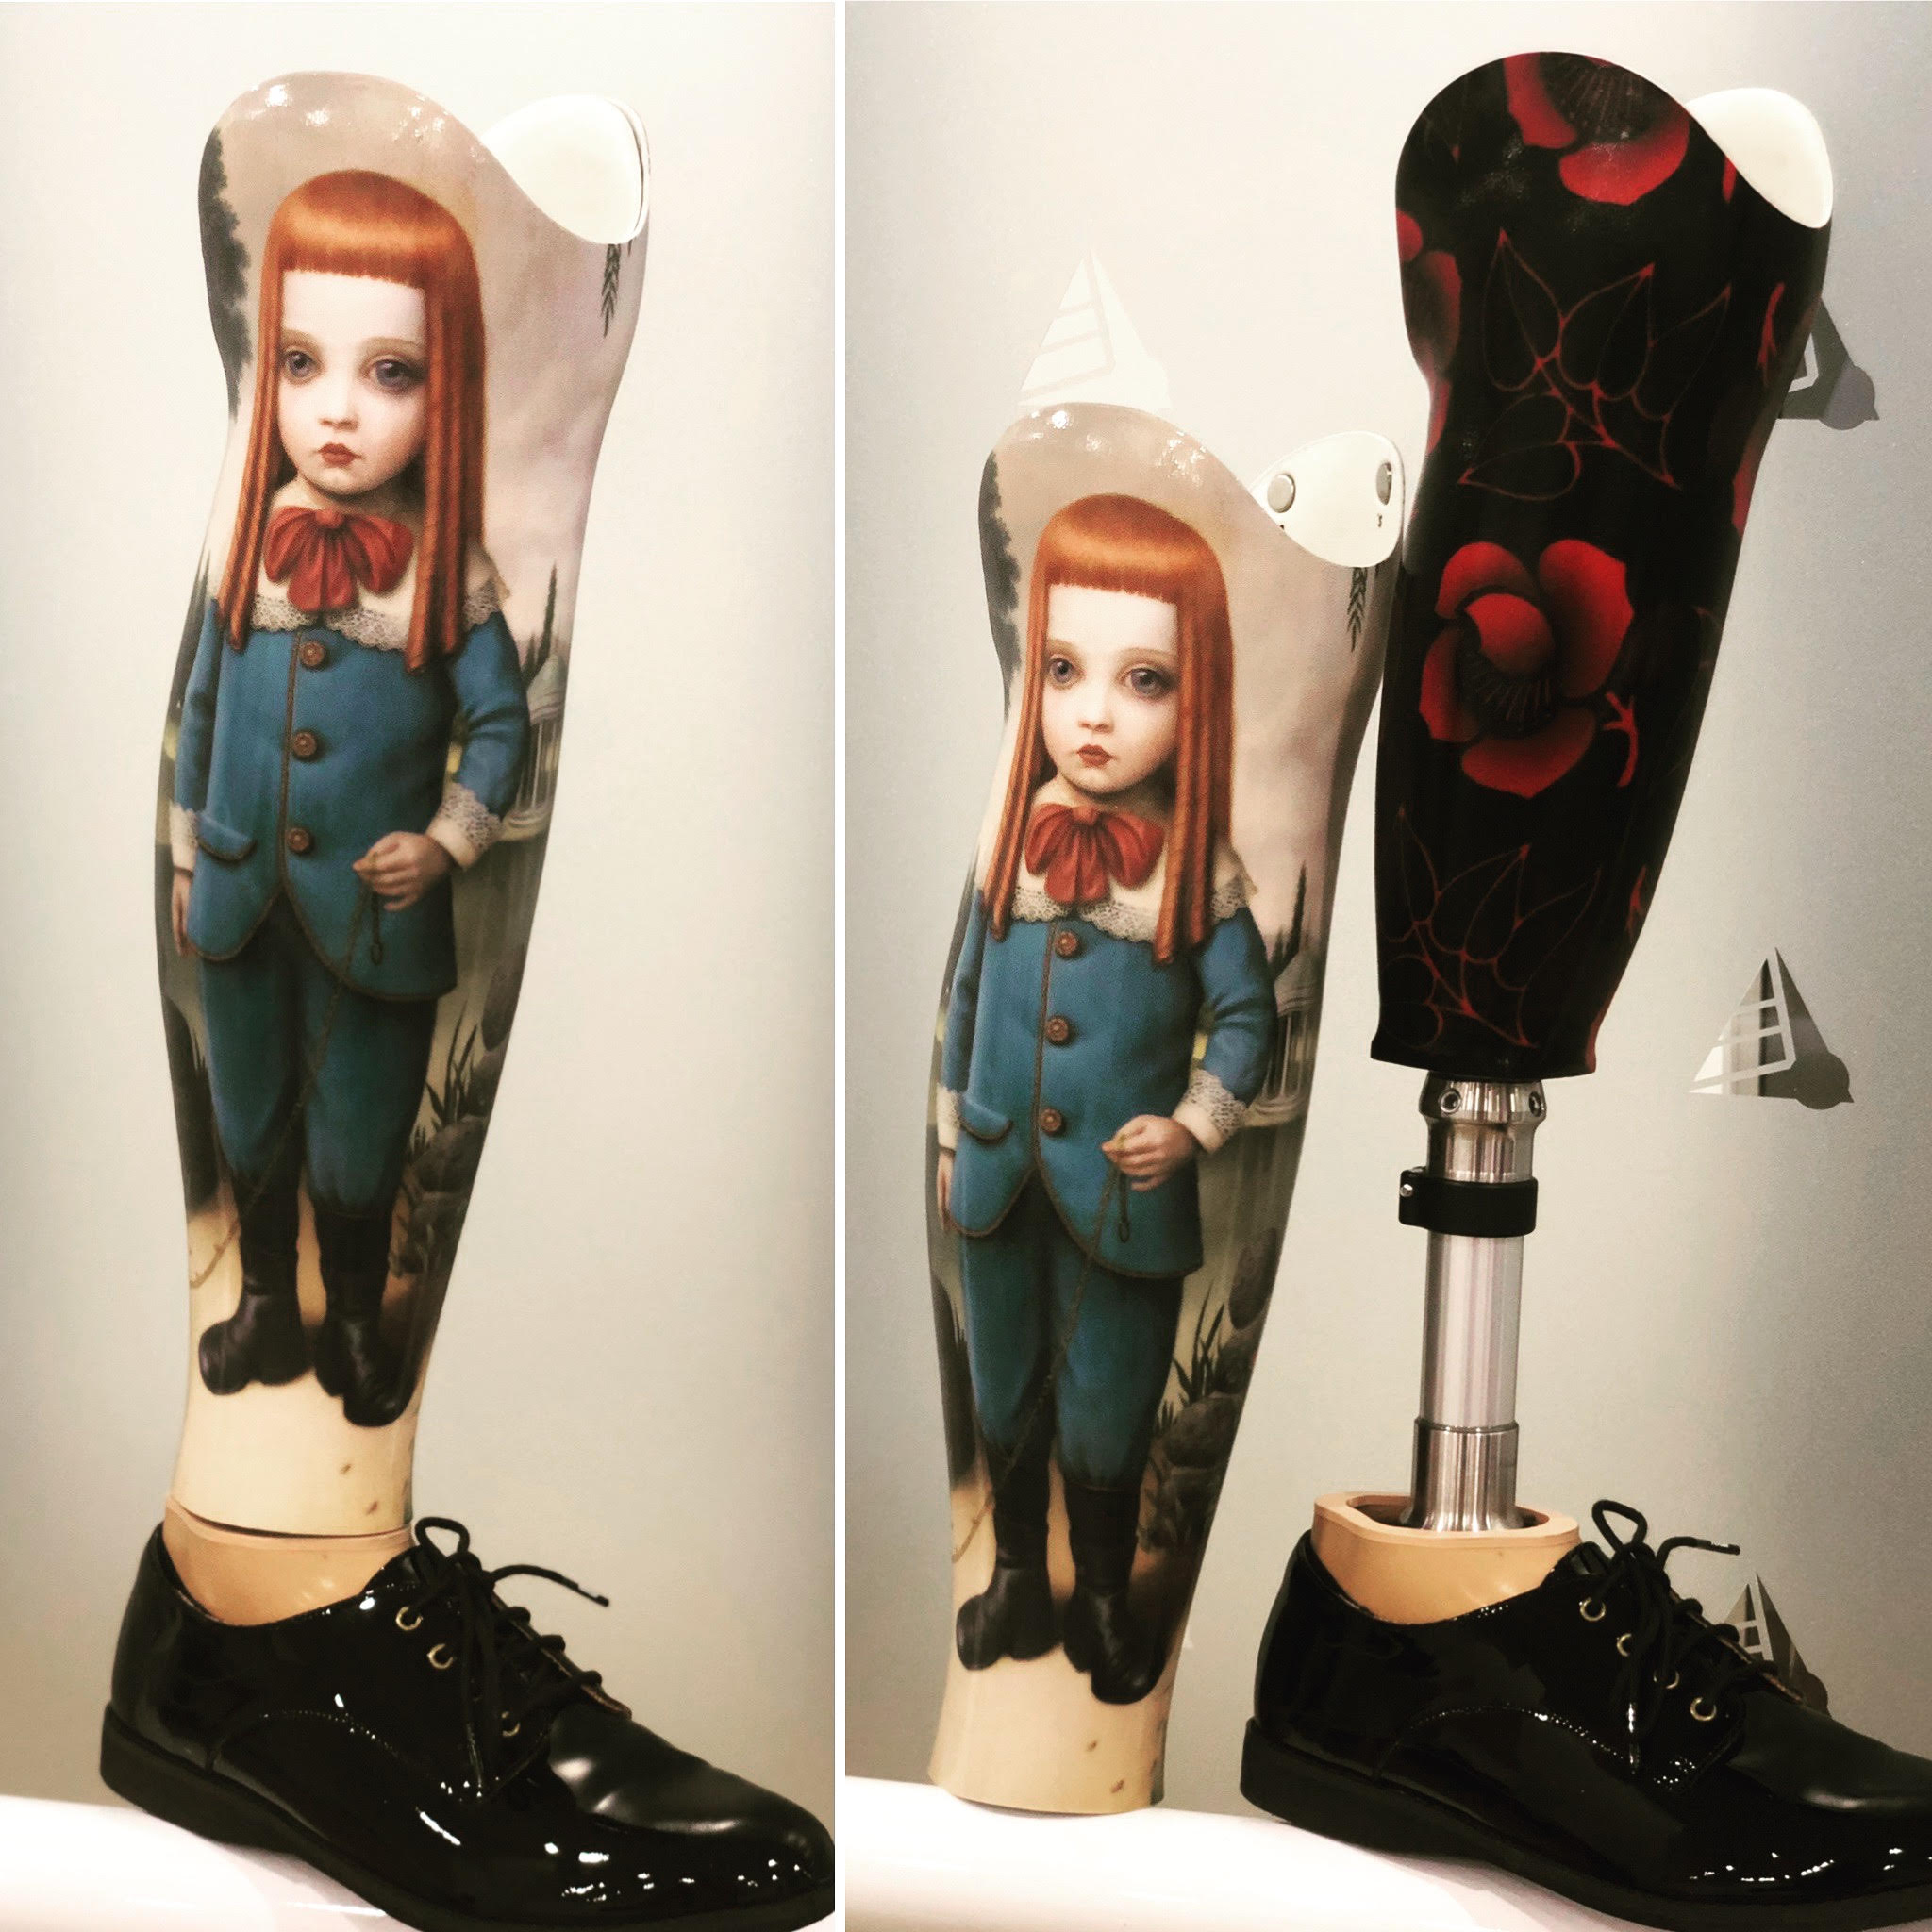 Priscilla Sutton’s prosthetic leg with cover artwork by Marion Peck, "Young Lord Oliver", 2007.